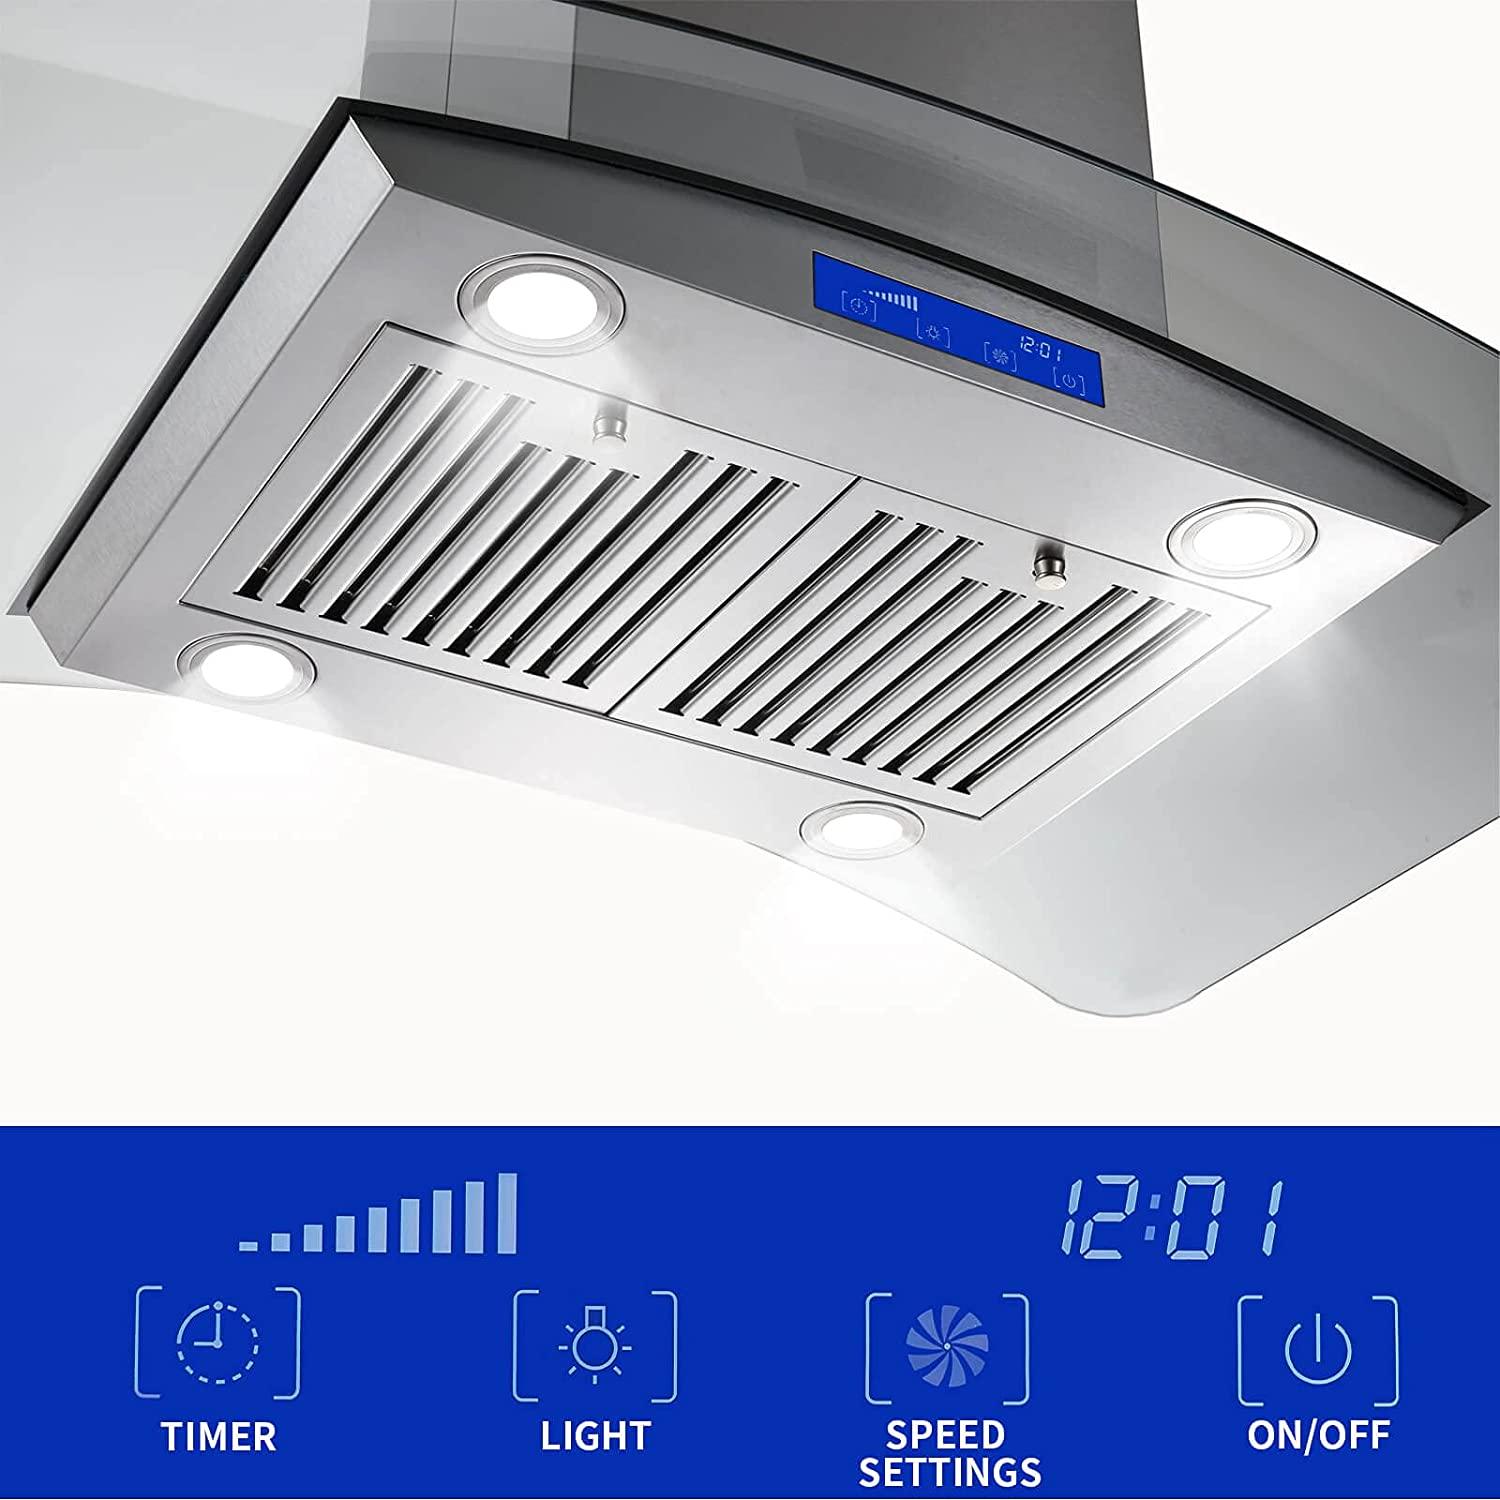 Tieasy 36 Island Range Hood 700CFM Stainless Steel Convertible, Ceiling Vent  Hood with Tempered Glass, 3-Speed Exhaust Fan, LED lights, LCD Display  Touch Panel and Permanent Grease Filters